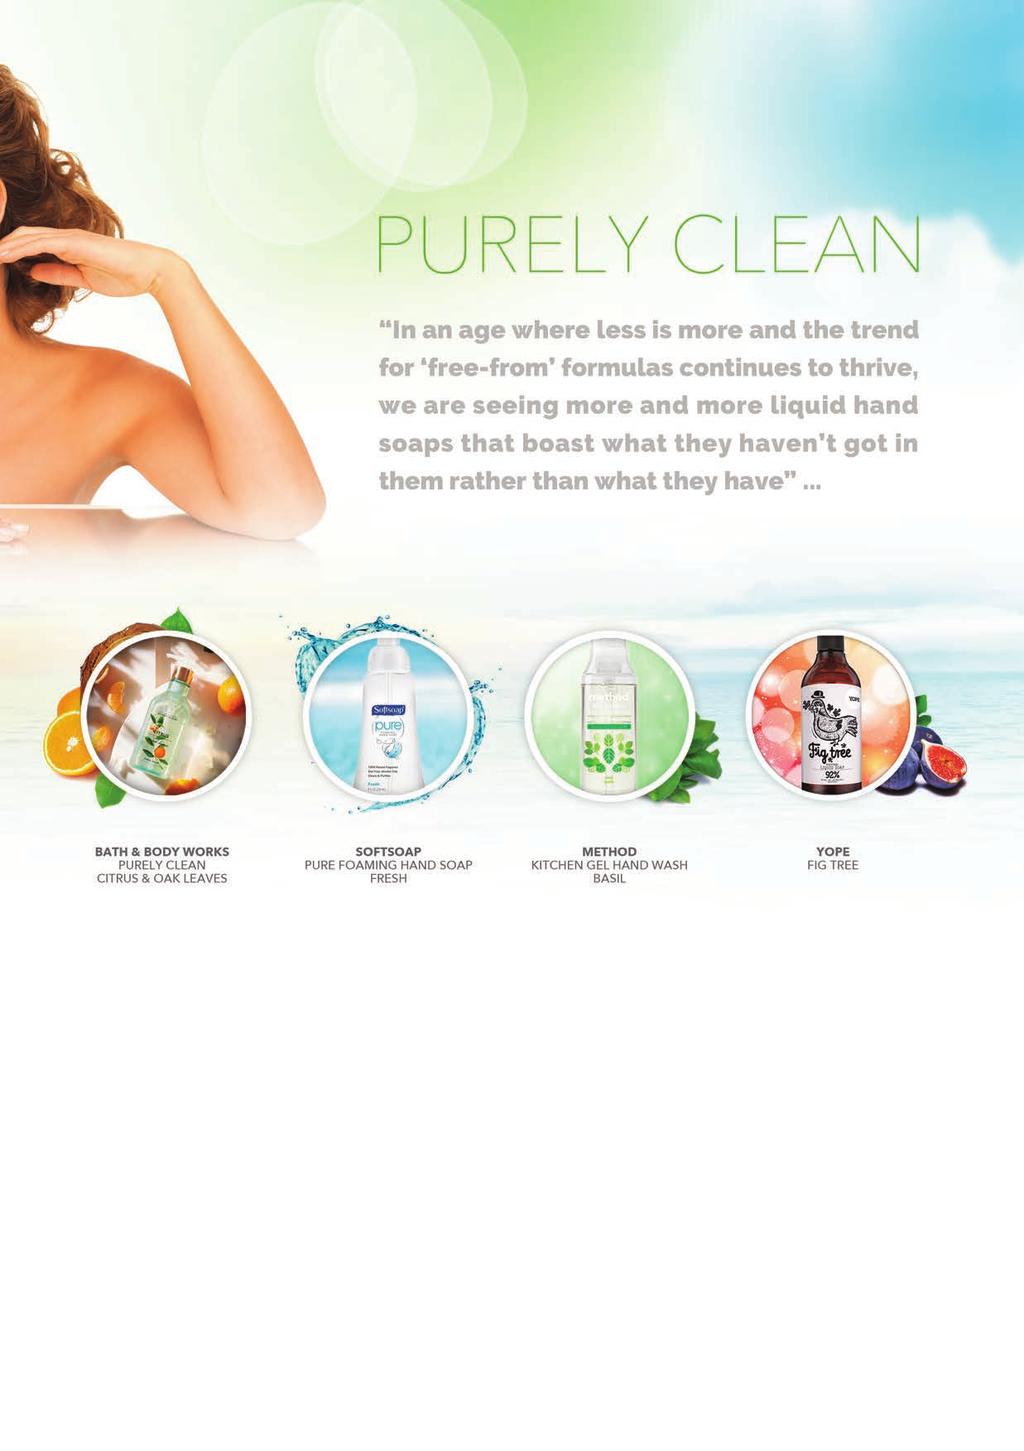 Purely Clean Hand Soaps from Bath & Body Works (US) are formulated without phthalates, petrolatum, phosphates, parabens, sulfates and dyes.